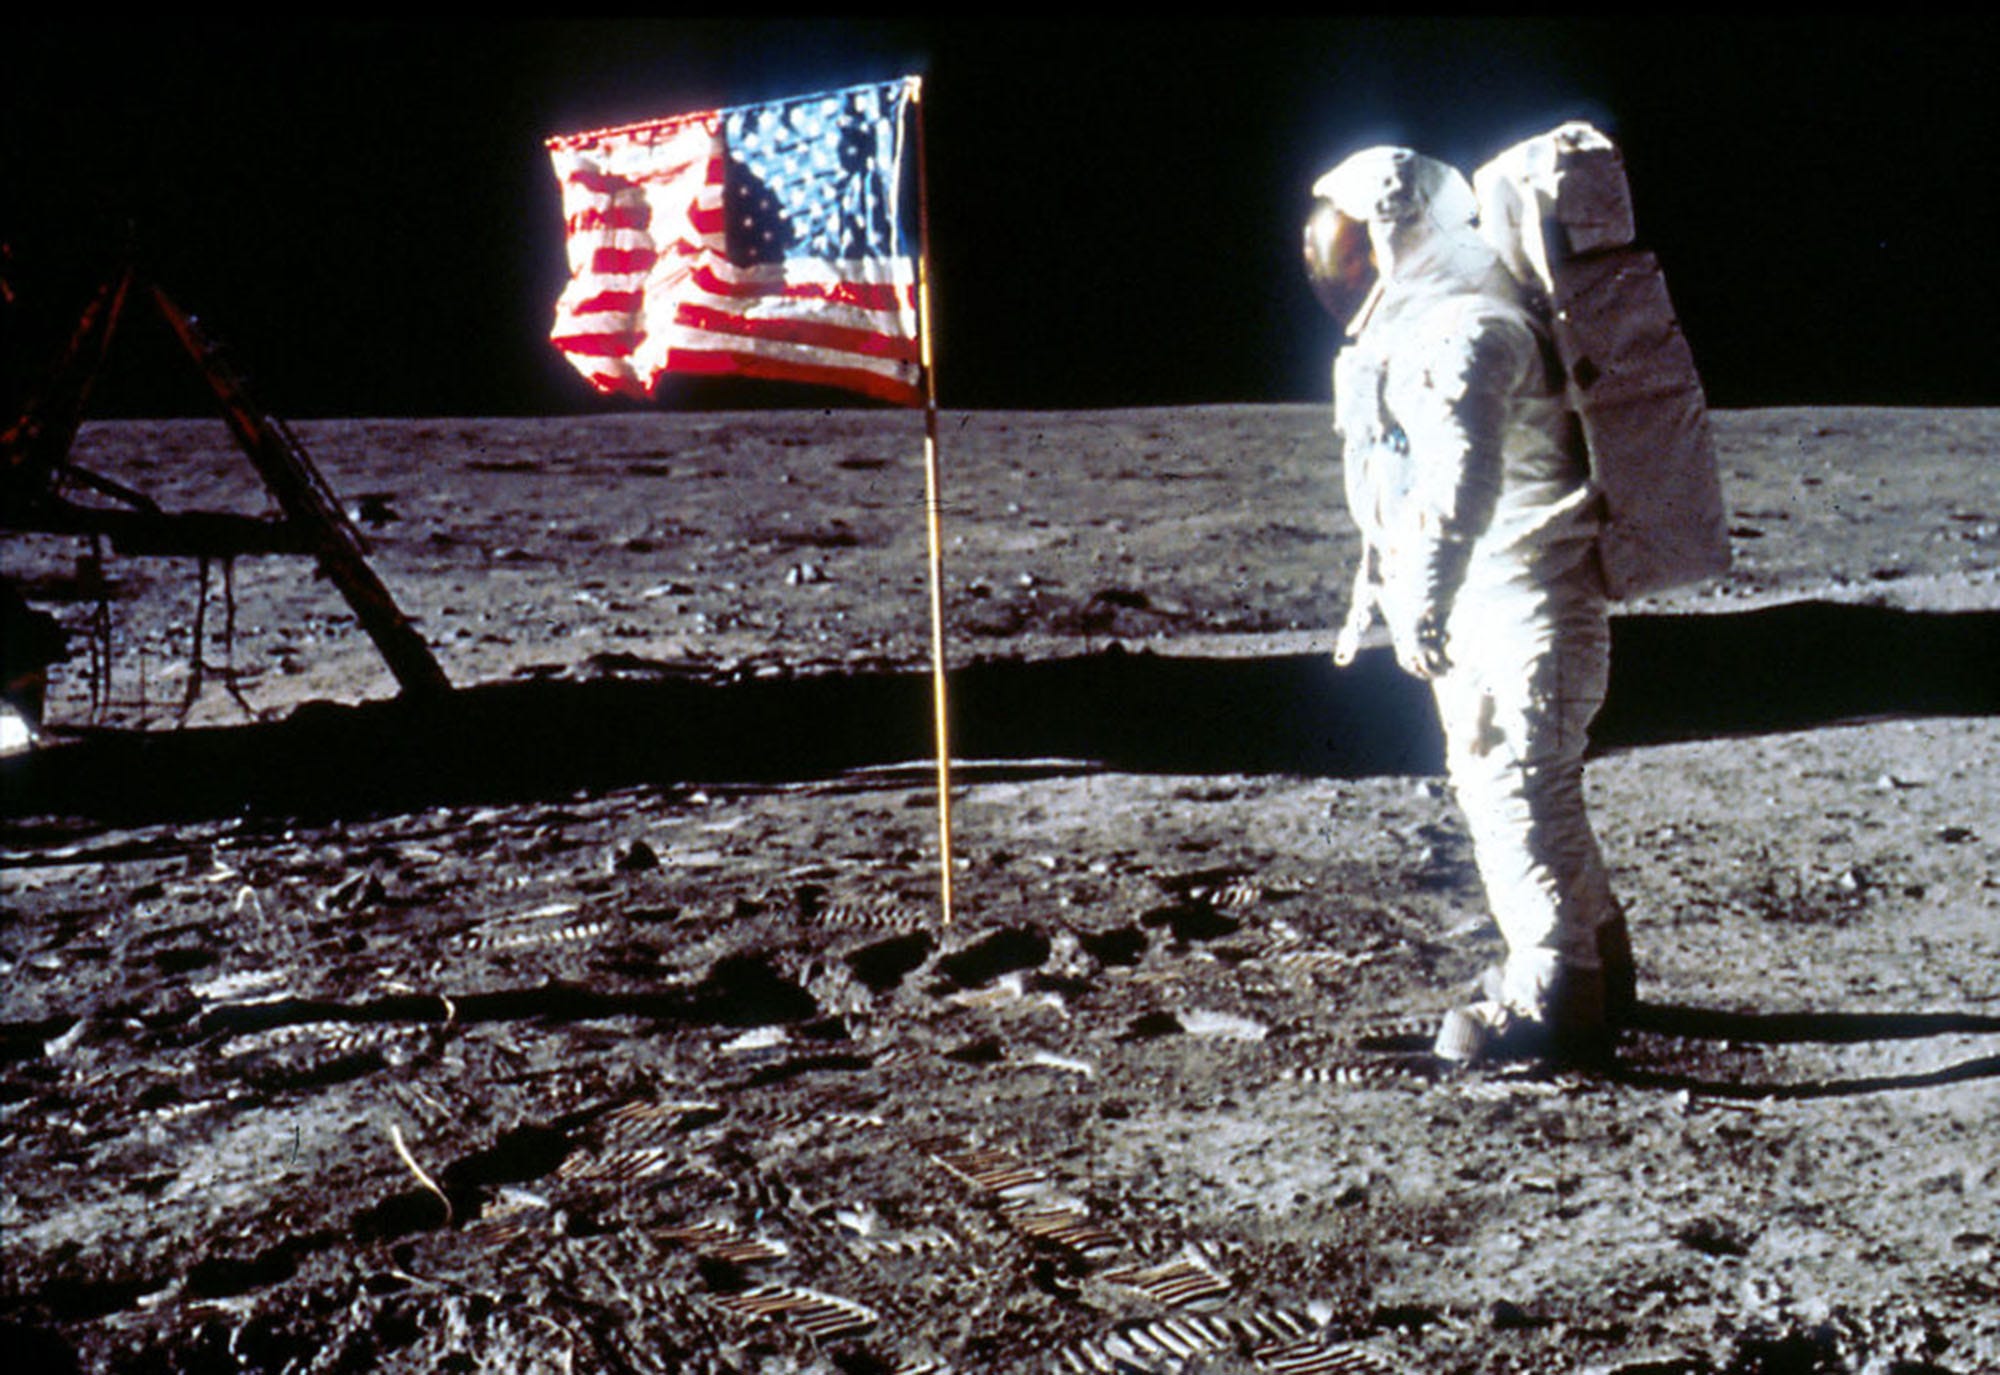 Astronaut Edwin "Buzz" Aldrin poses next to the U.S. flag July 20, 1969 on the moon during the Apollo 11 mission.